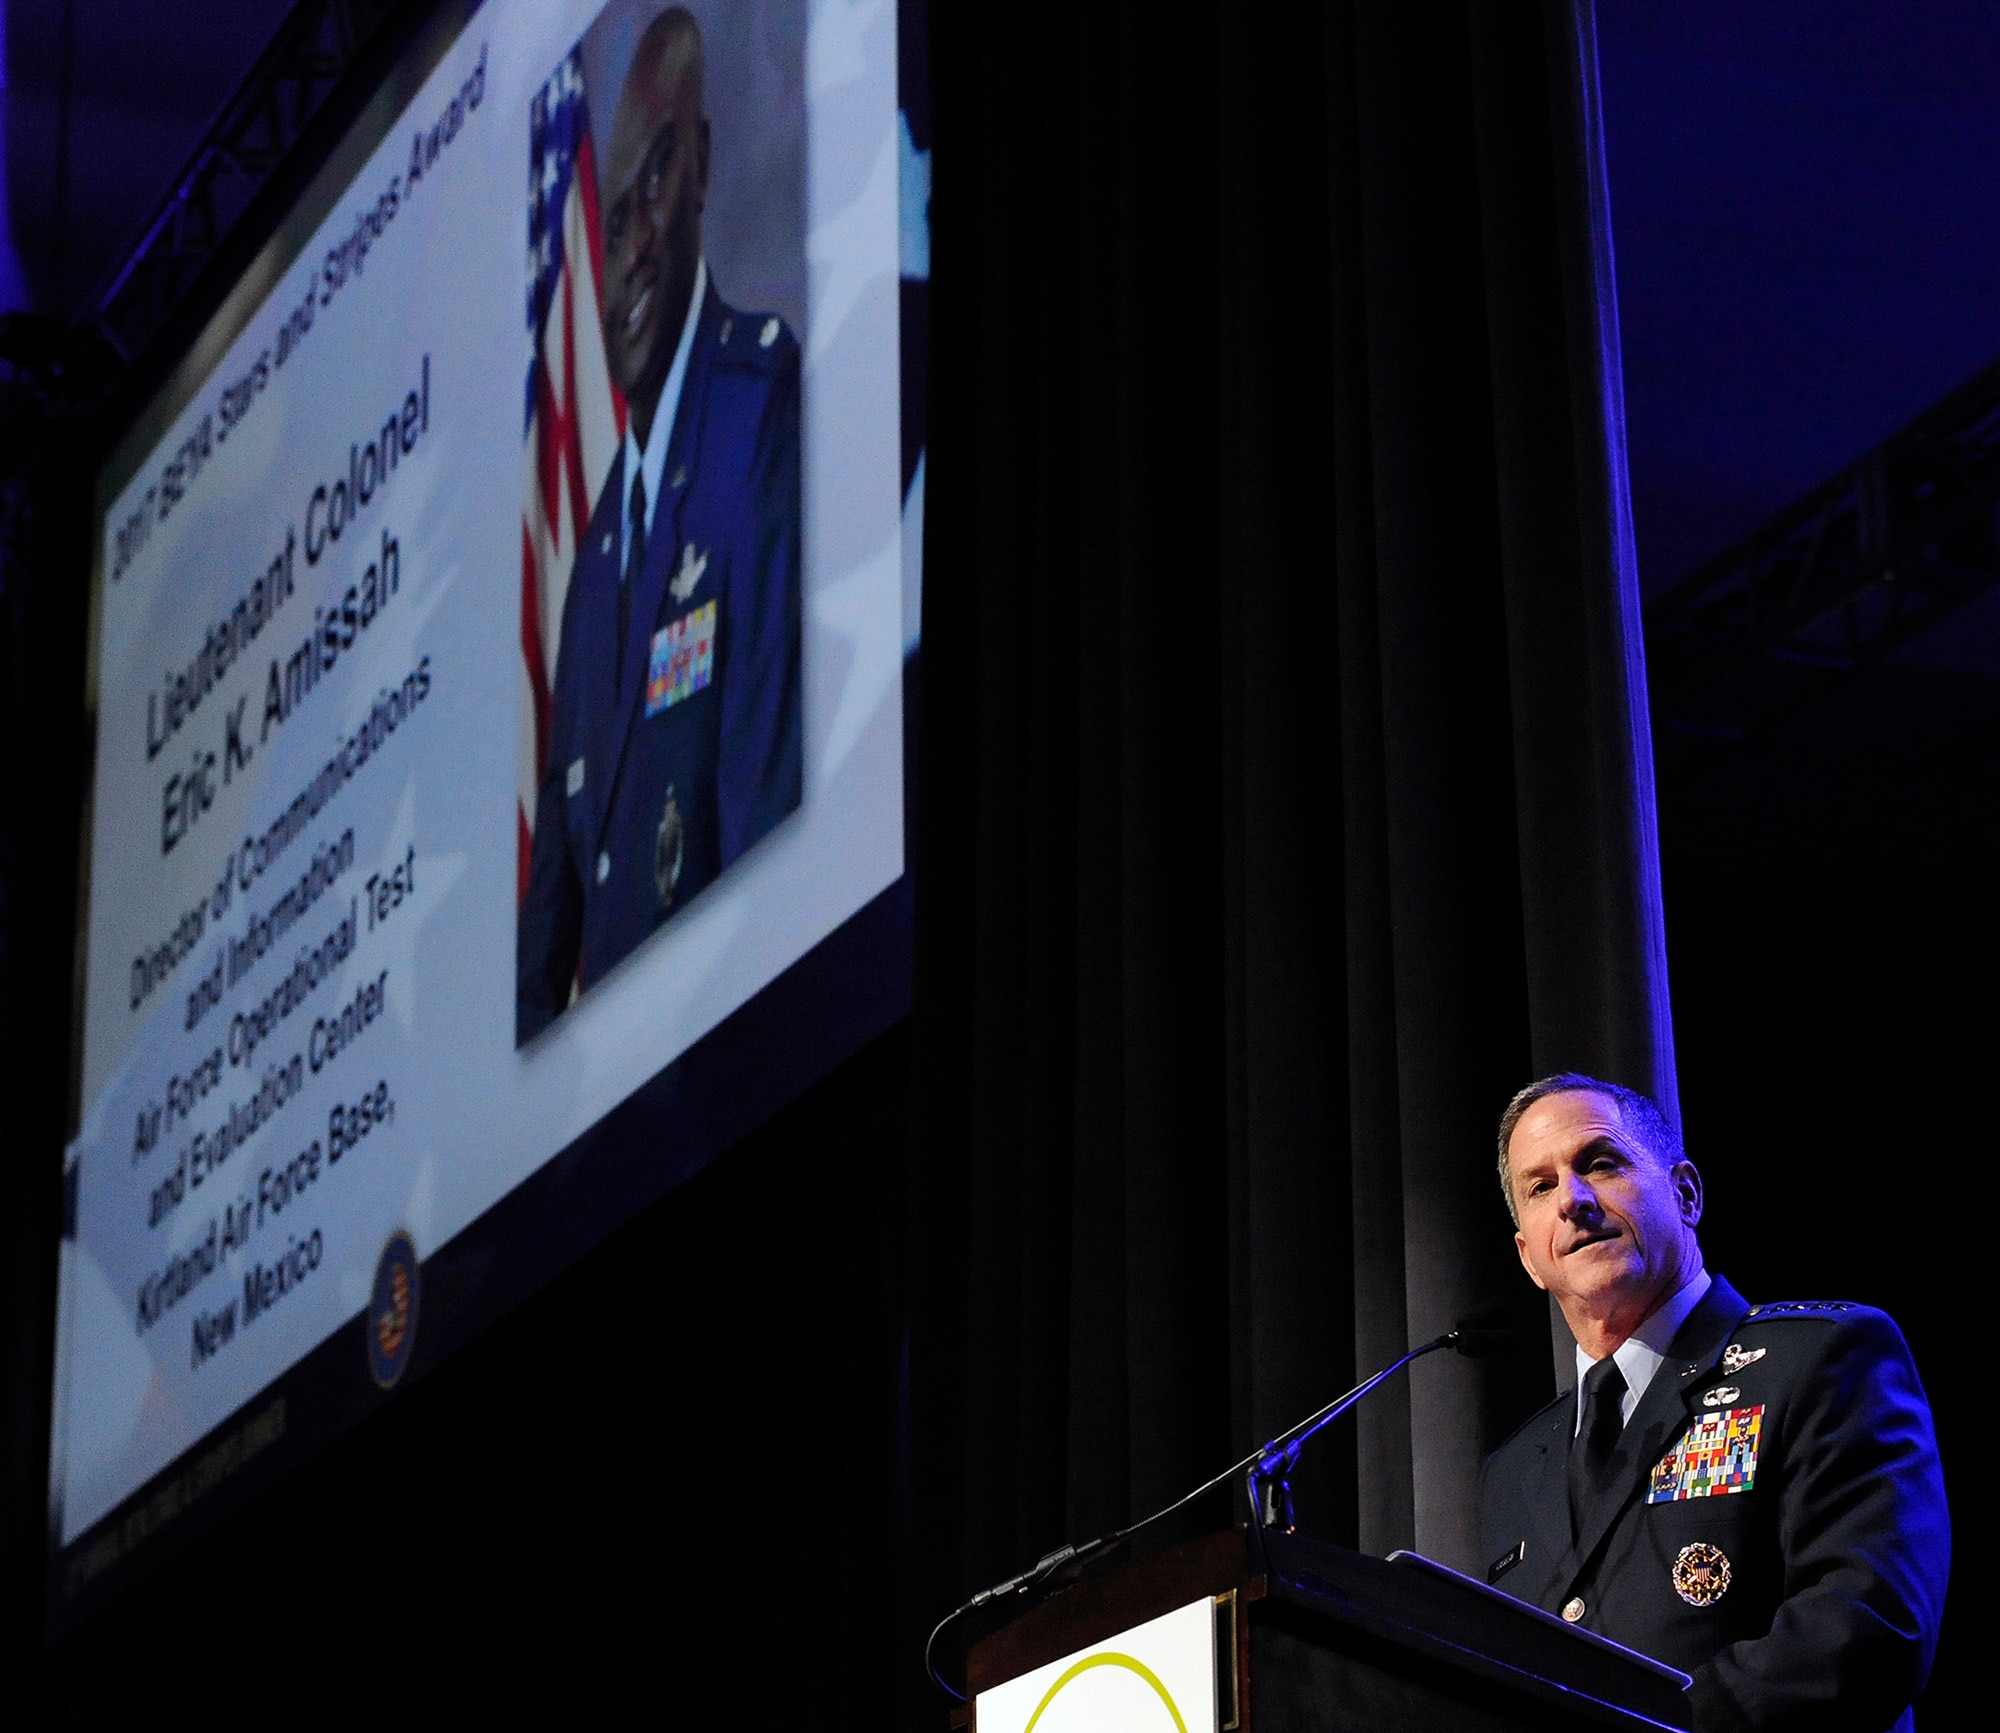 Air Force Chief of Staff Gen. David L. Goldfein speaks on the value of Airmen to the Air Force mission during the Black Engineer of the Year Awards Science, Technology, Engineering and Mathematics Conferences' Stars and Stripes ceremony Feb. 10, 2017, in Washington, D.C. (U.S. Air Force photo/Tech. Sgt. Robert Barnett)